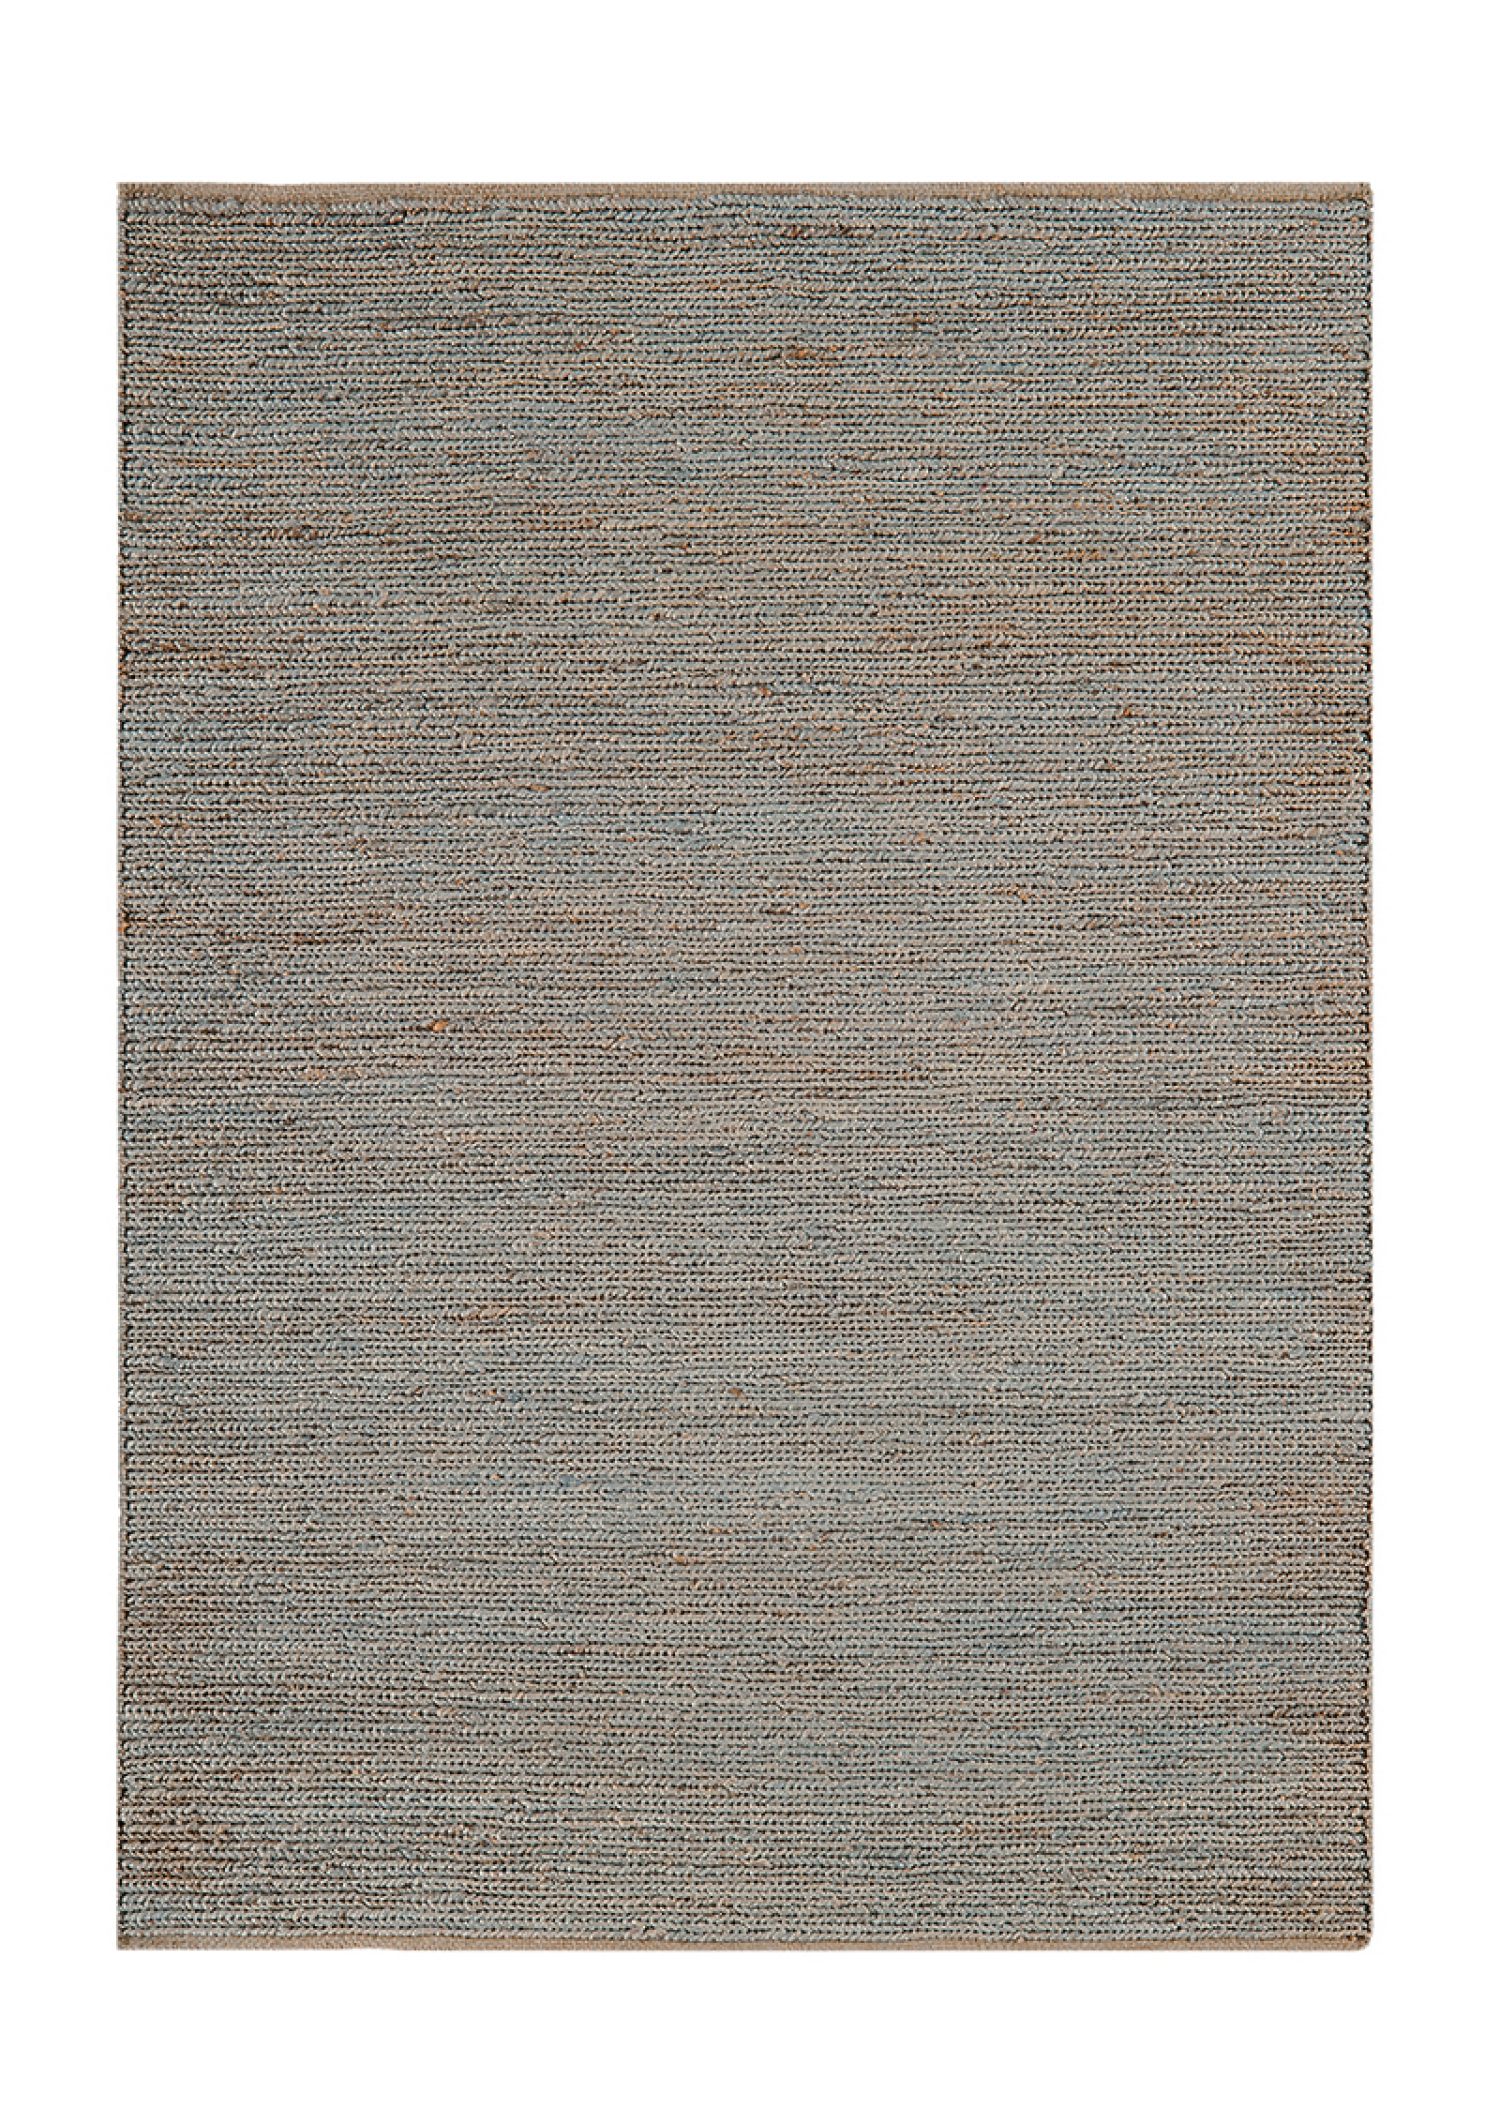 Rustic hand woven juste rug